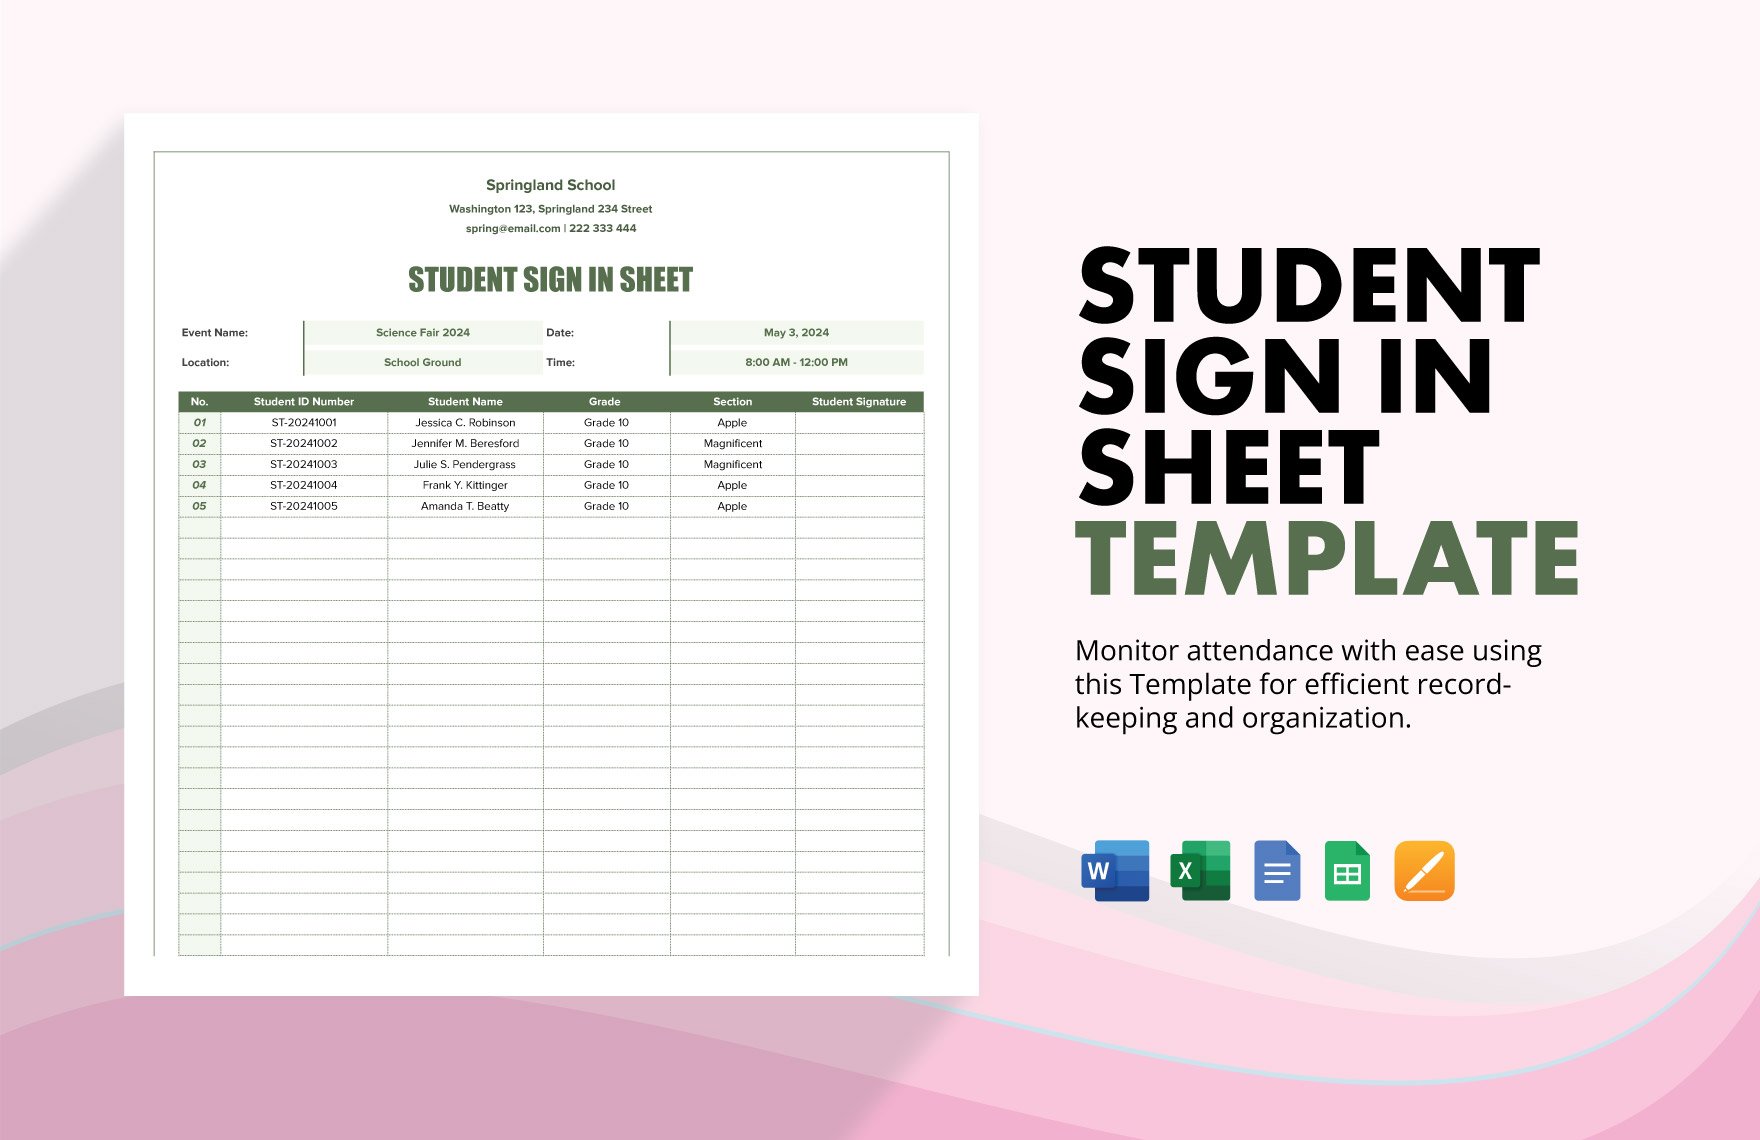 Student Sign In Sheet Template in Word, Google Docs, Excel, Google Sheets, Apple Pages